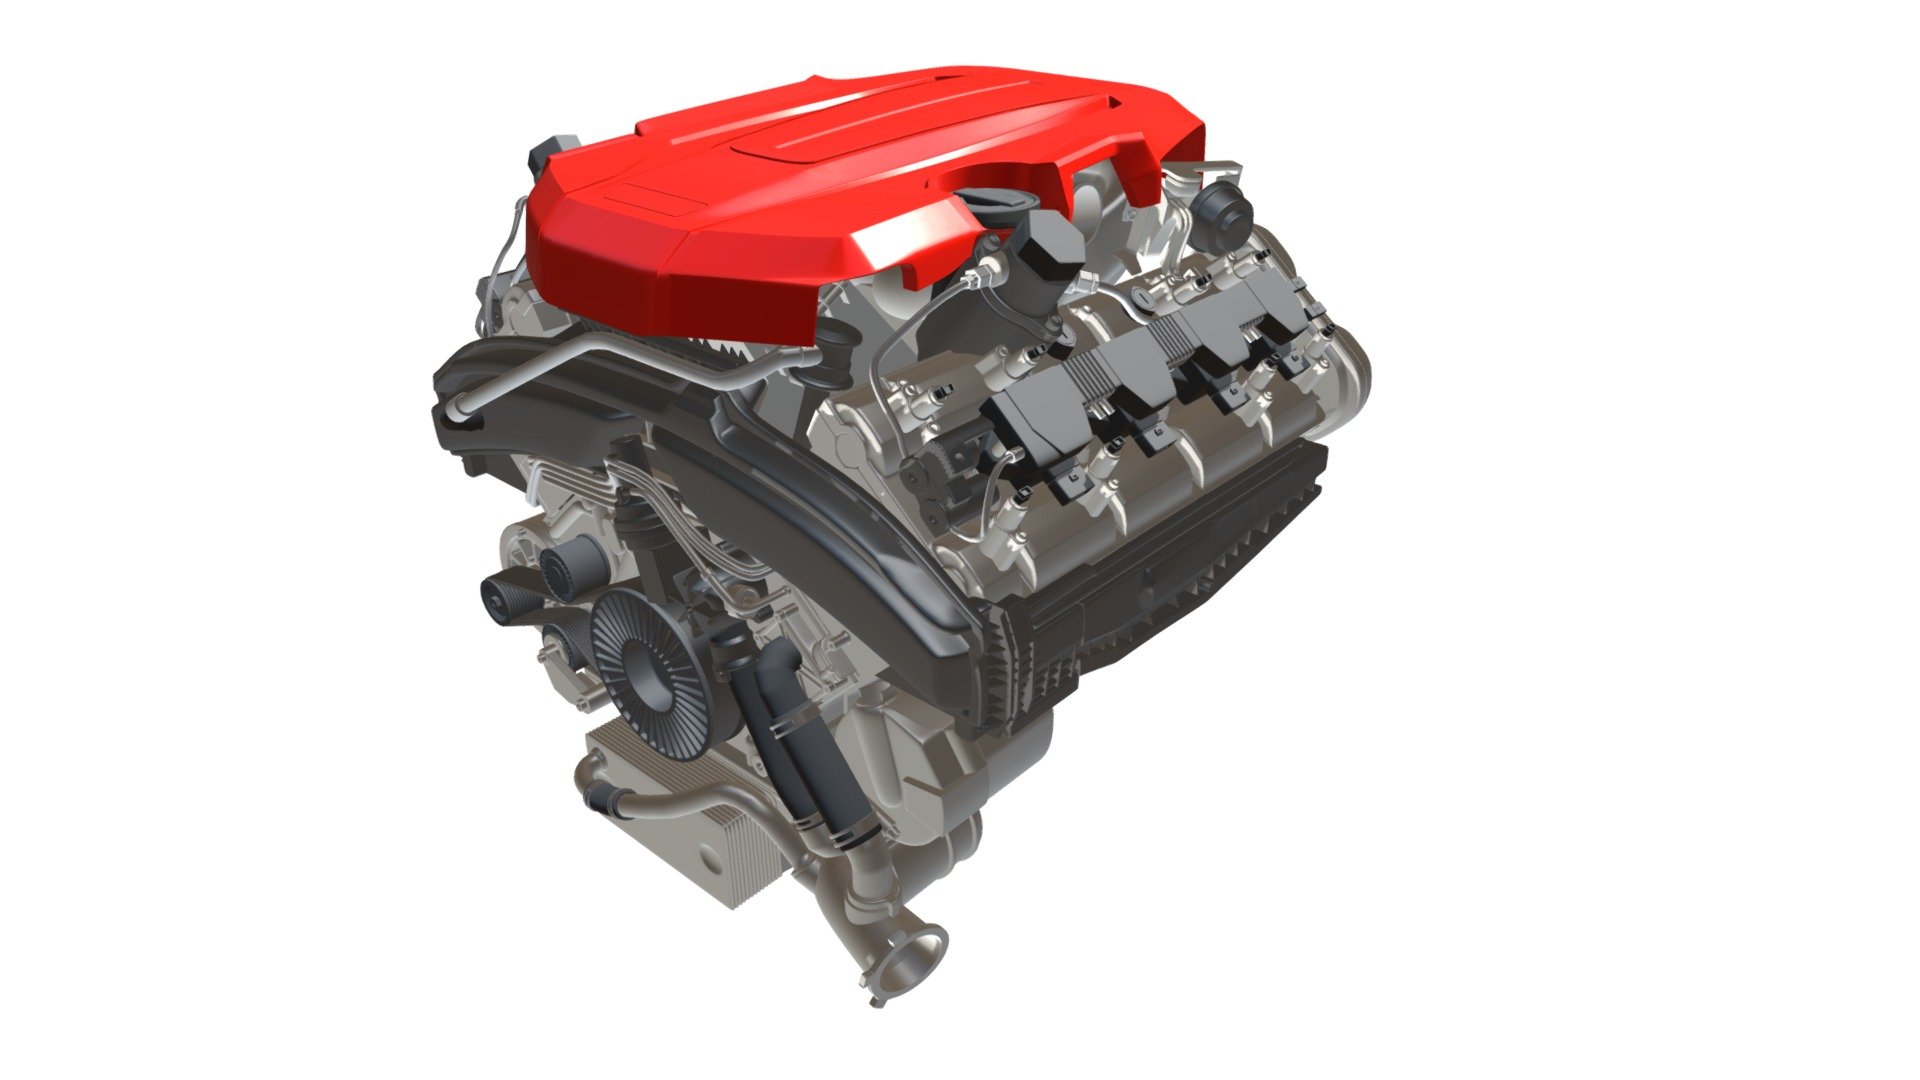 High quality 3d model of V8 car engine.

If you need other 3d formats, please contact us 3d model